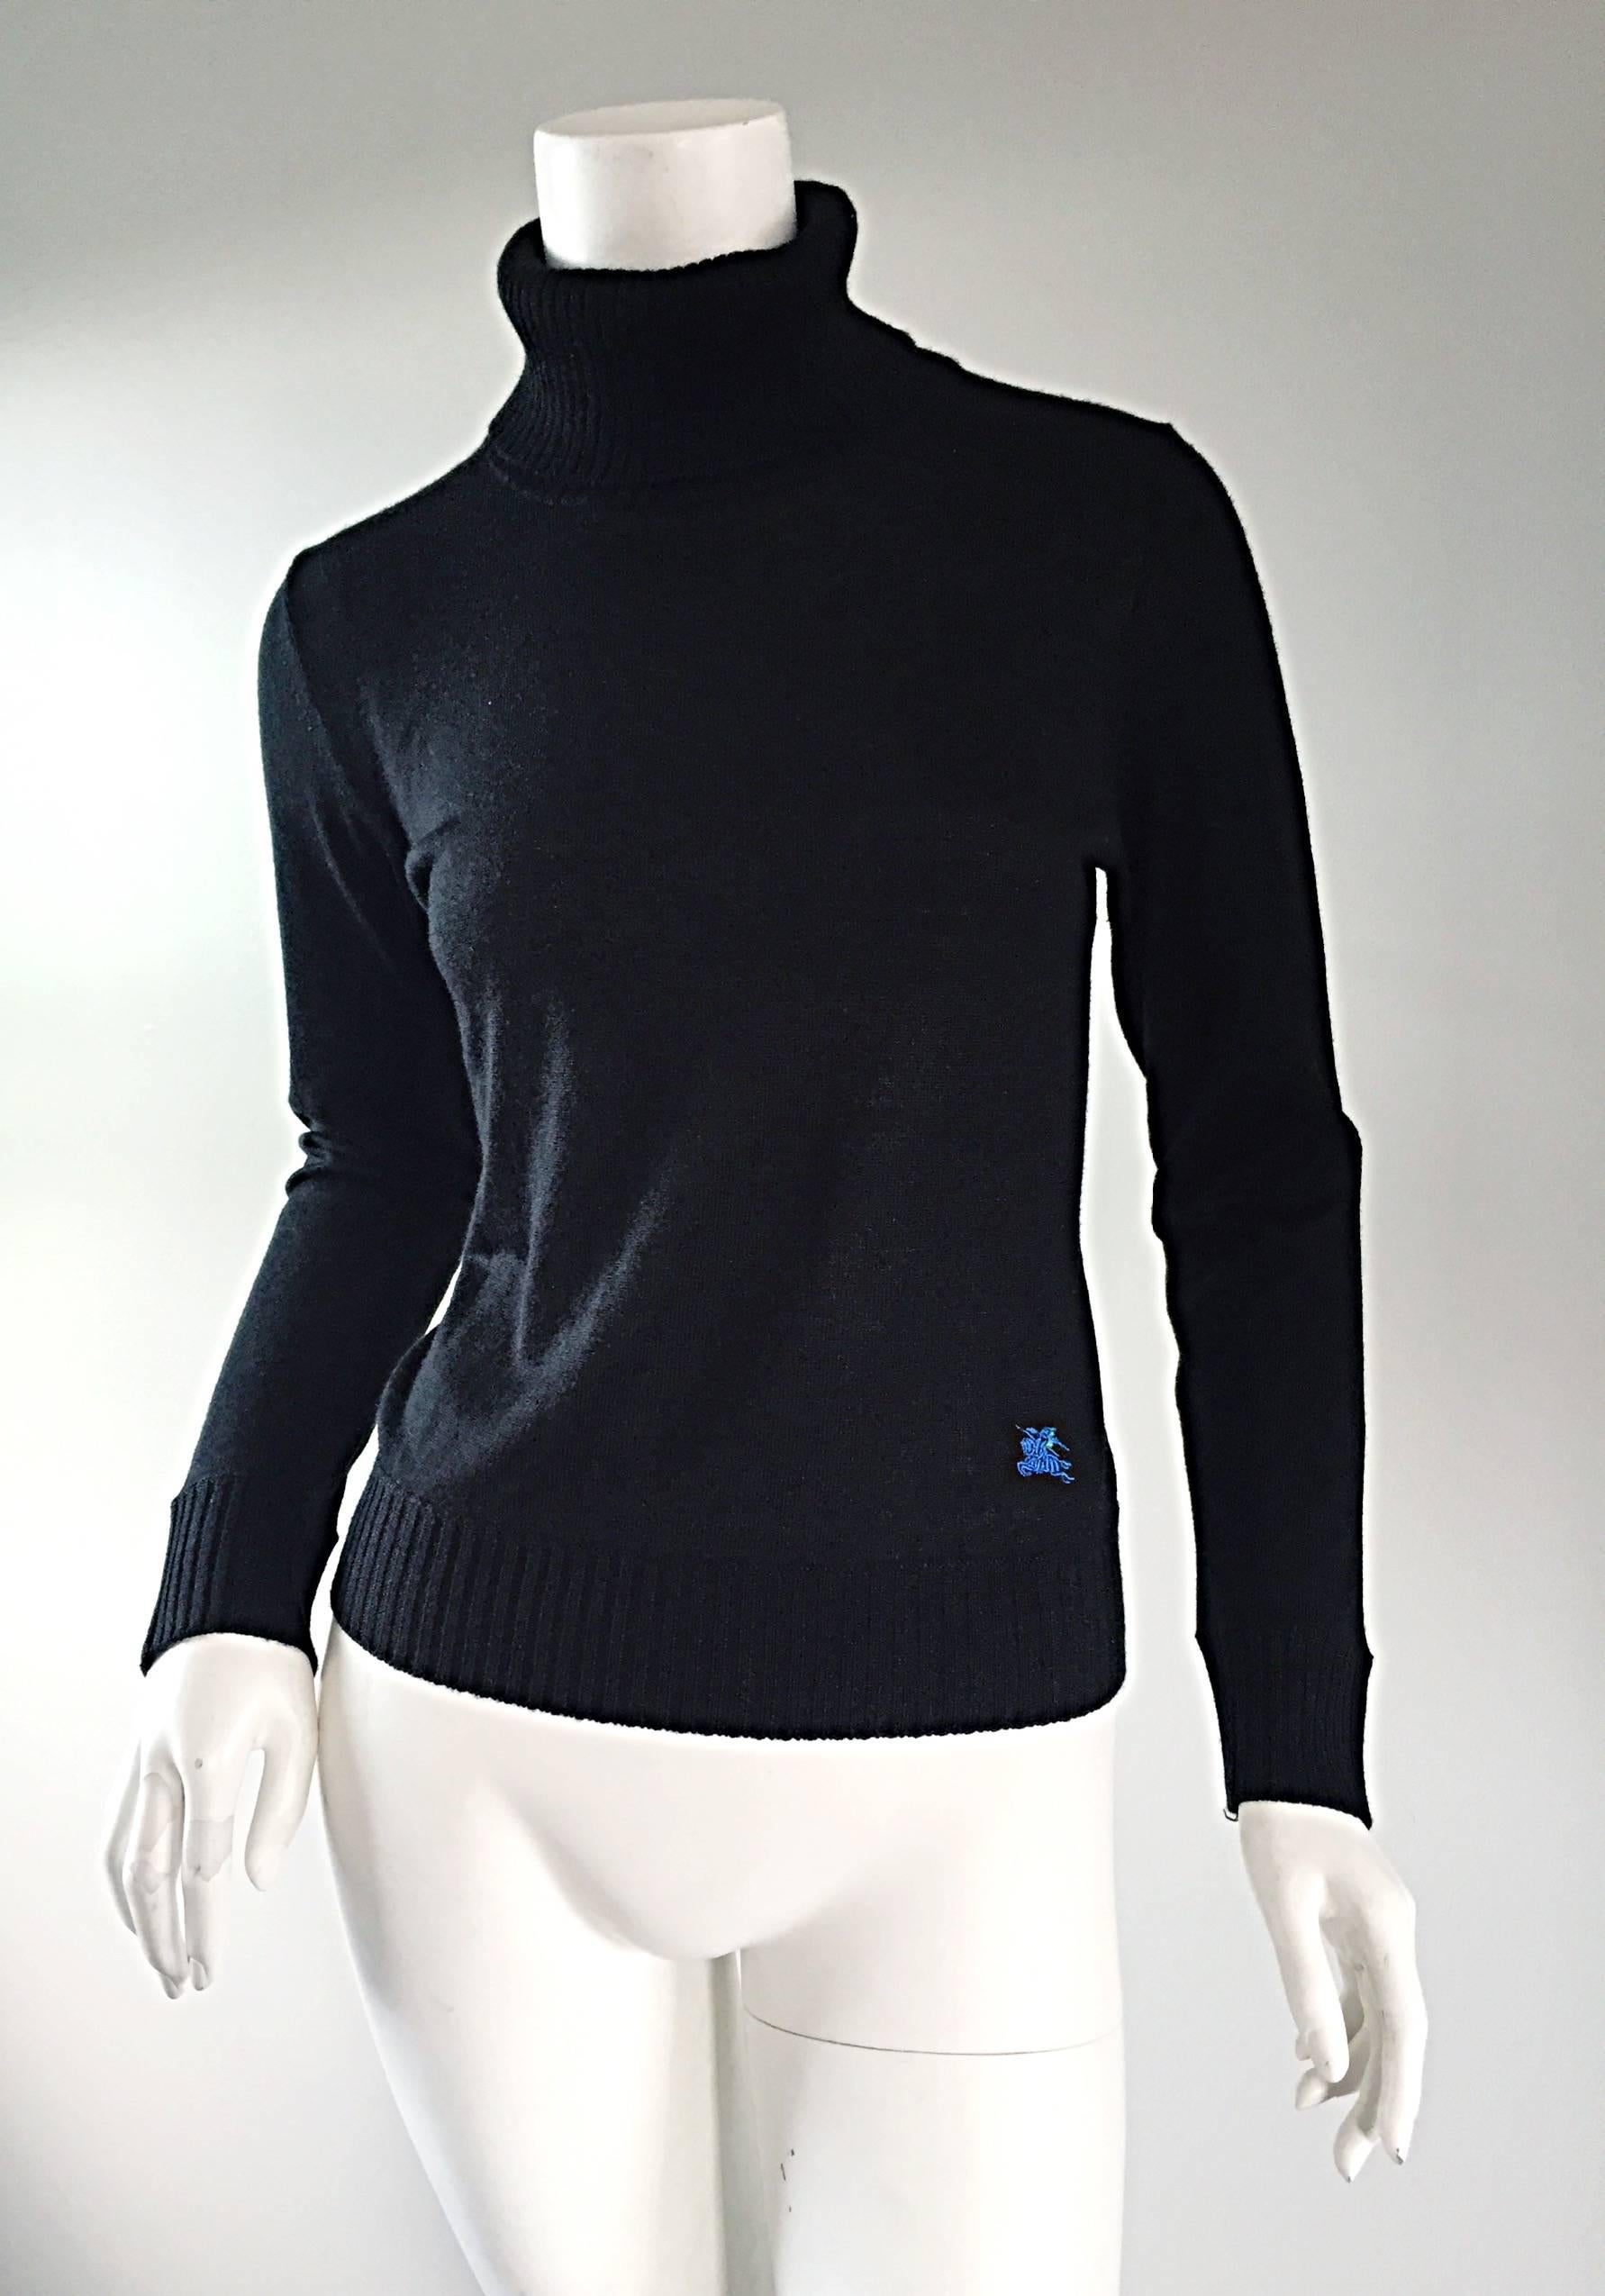 Nice new vintage Burberry turtleneck sweater! An essential fall/winter staple that can easily transition from day to night. Slim, tailored fit,, with signature blue Burberry crest at side waist. Great with jeans, or perfect tucked into a skirt. In